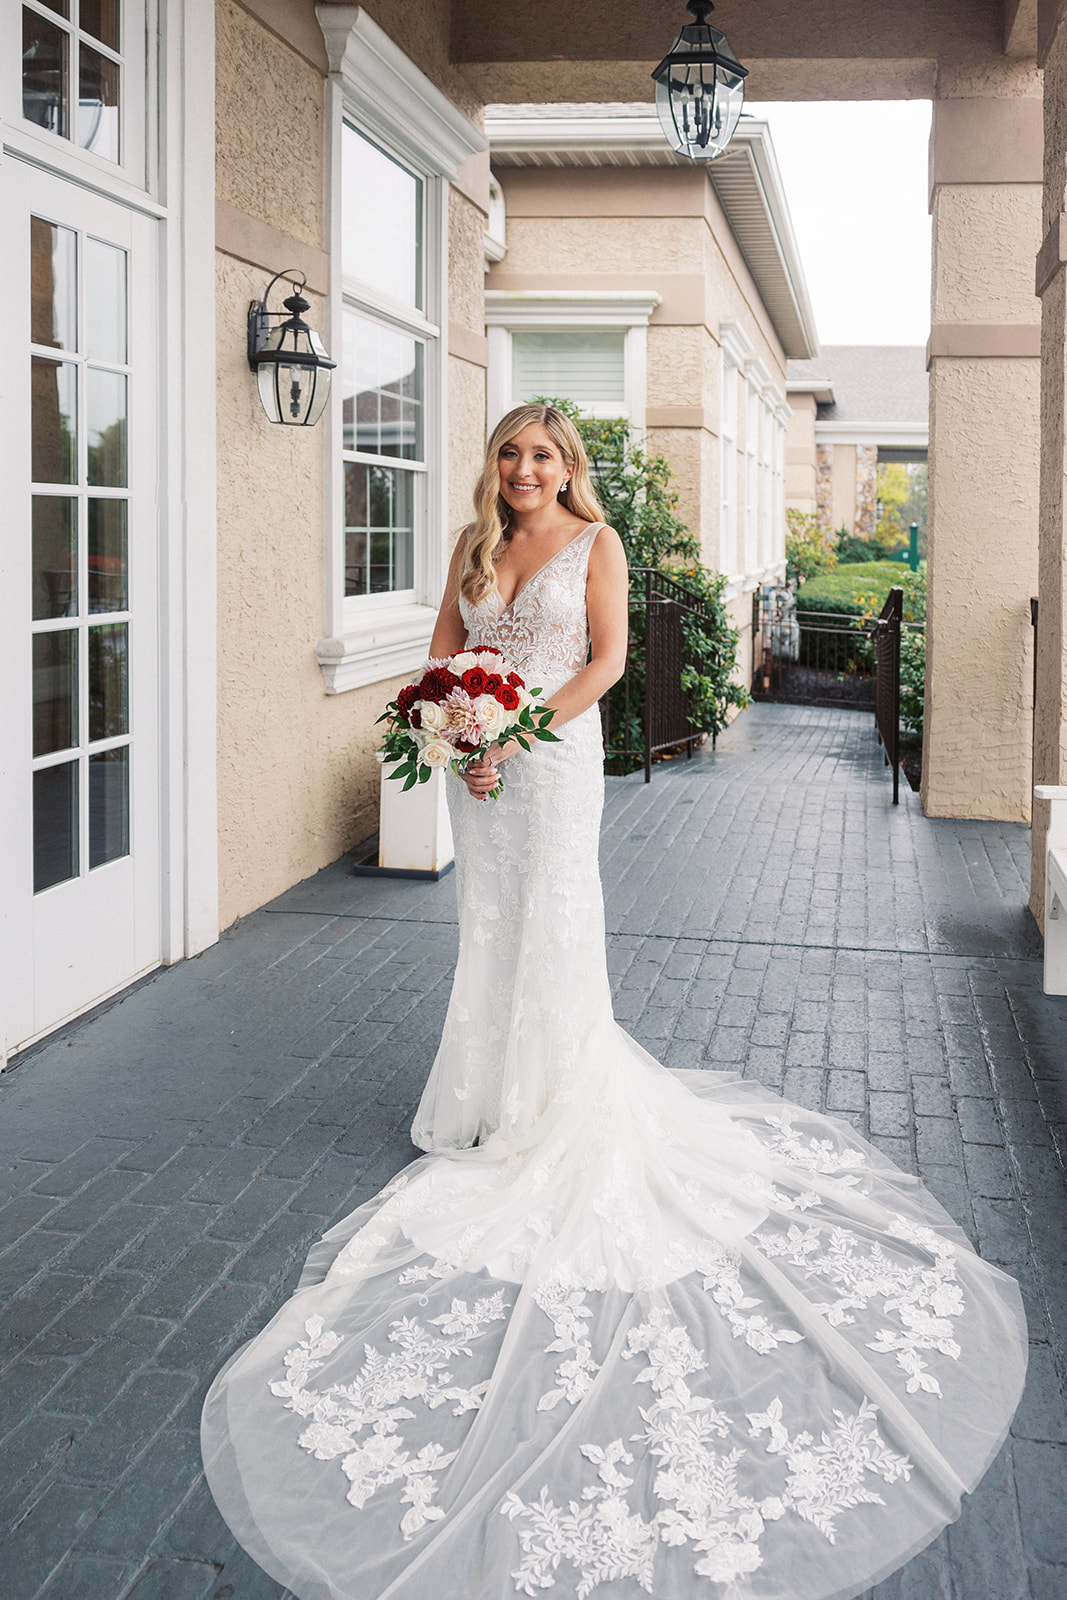 A bride in a long lace embroidered dress stands on a brick patio holding her bouquet of red and white florals